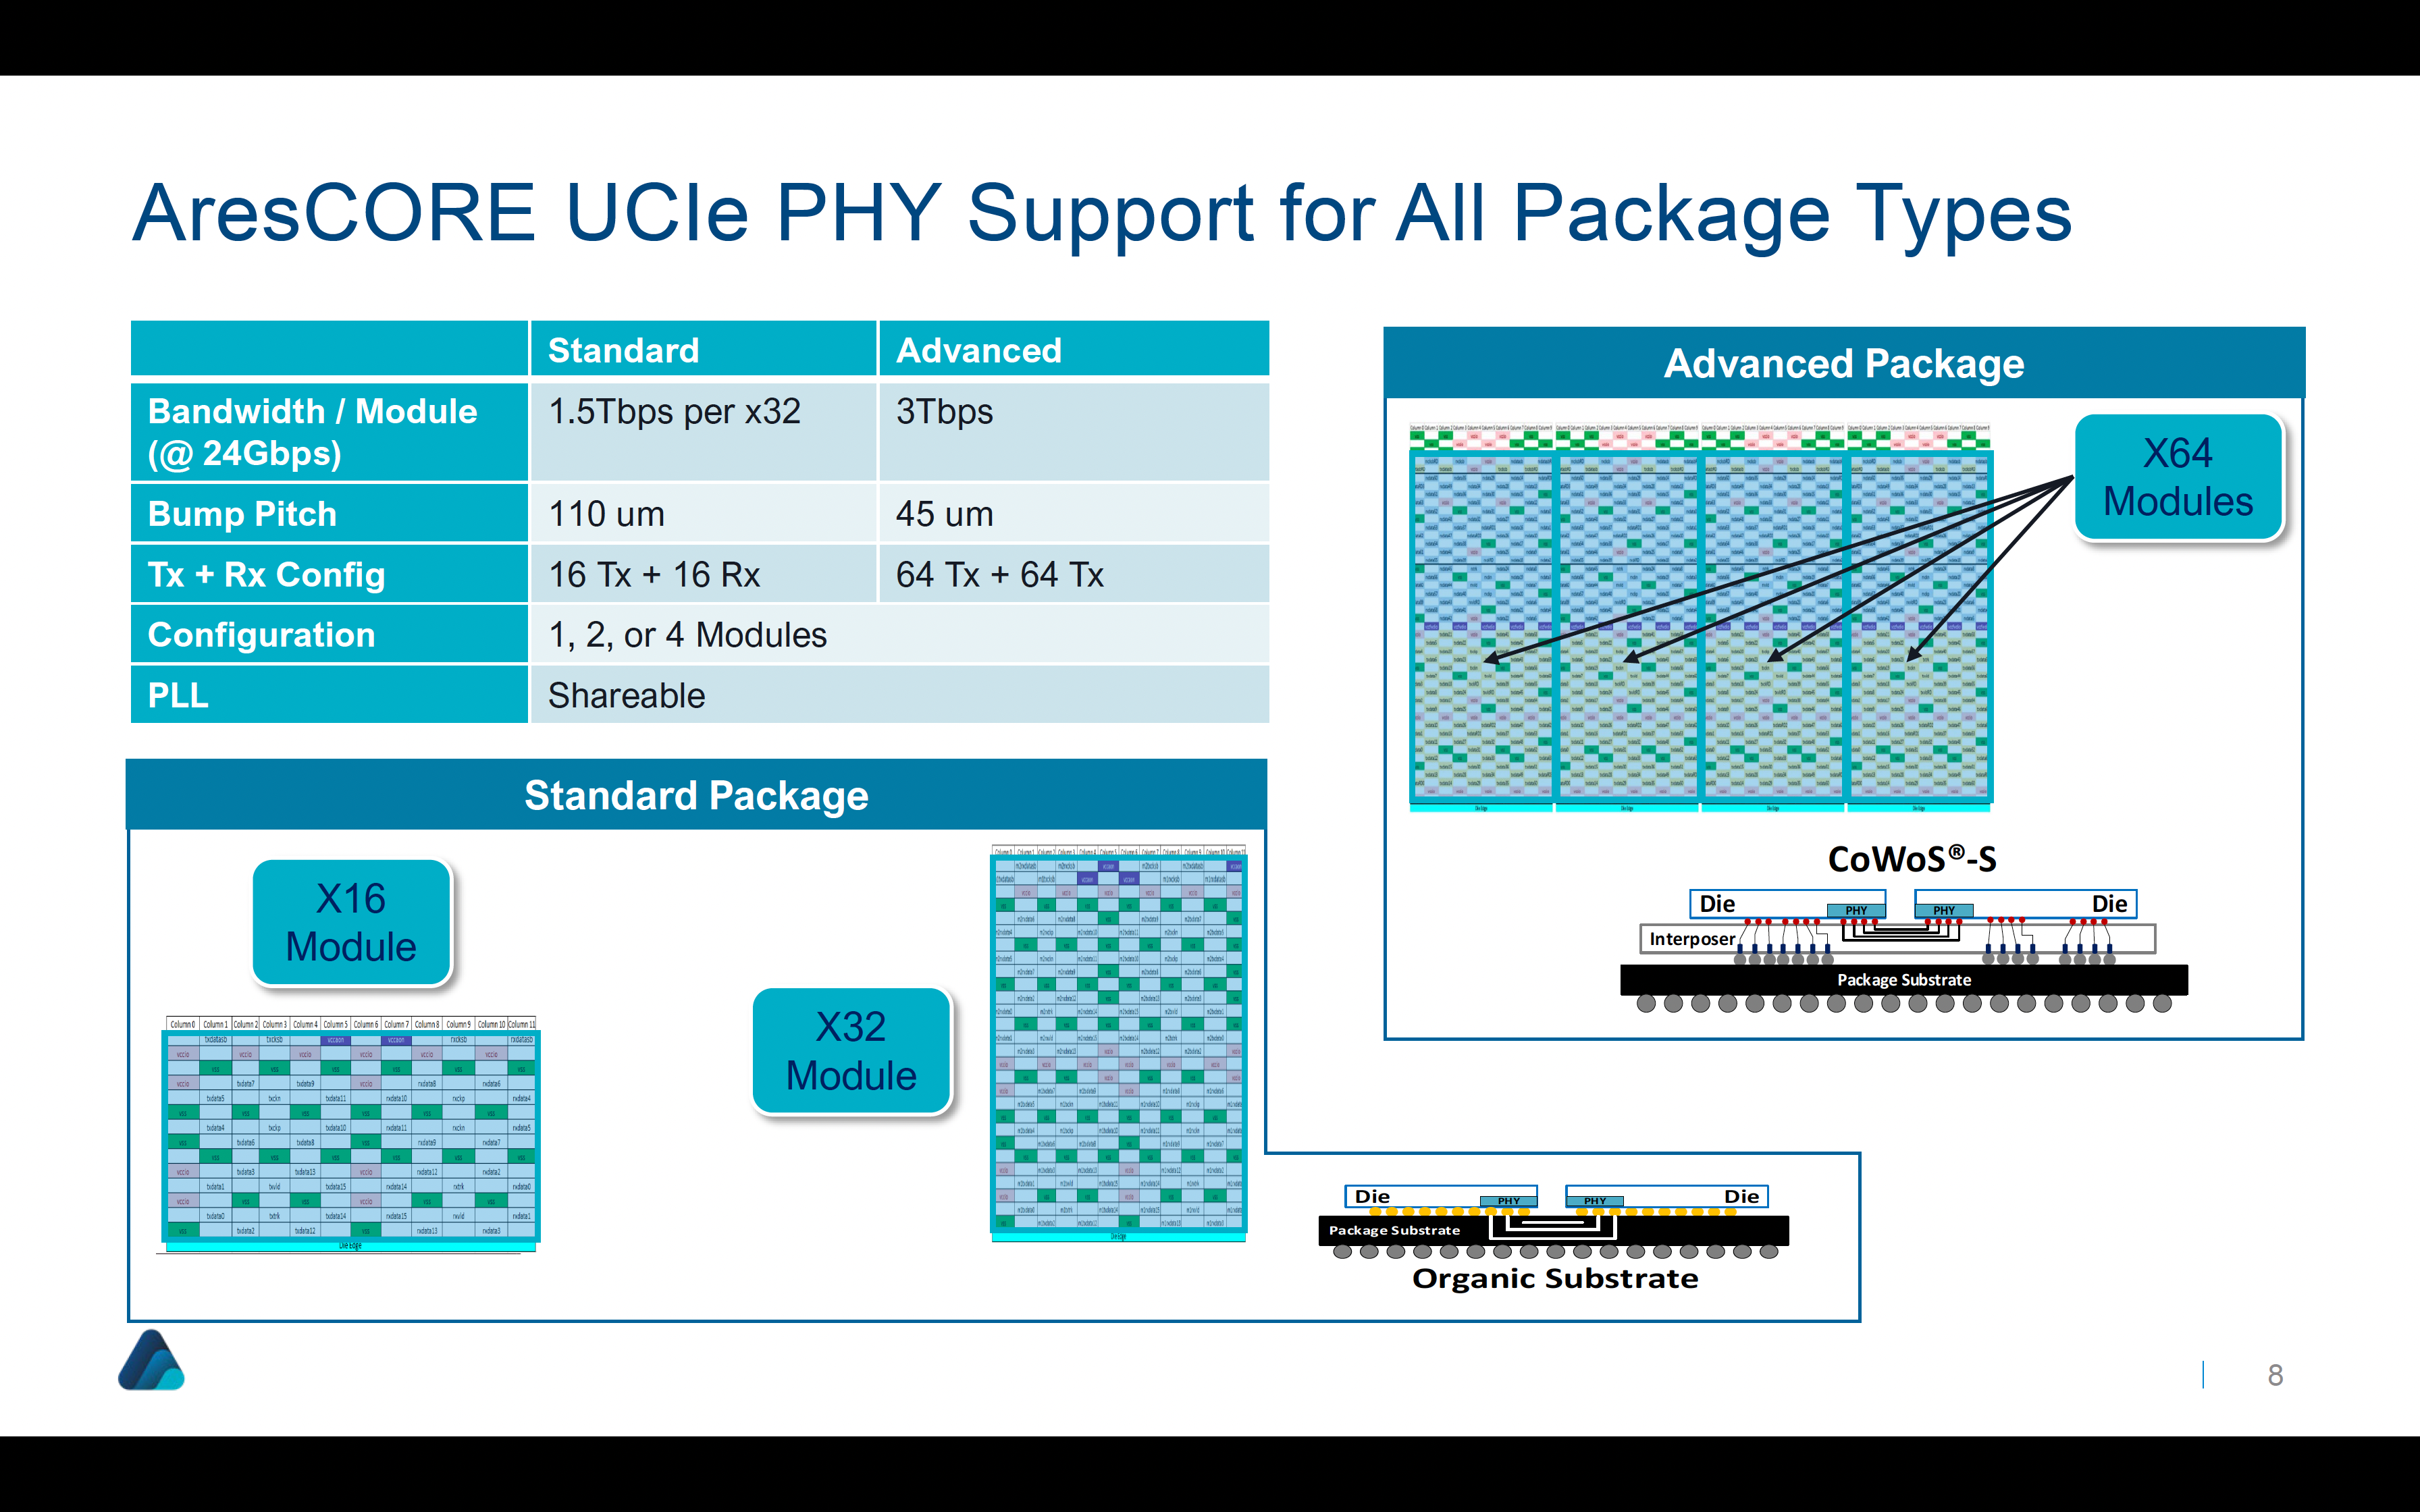 AresCORE UCIe PHY Support for All Package Types